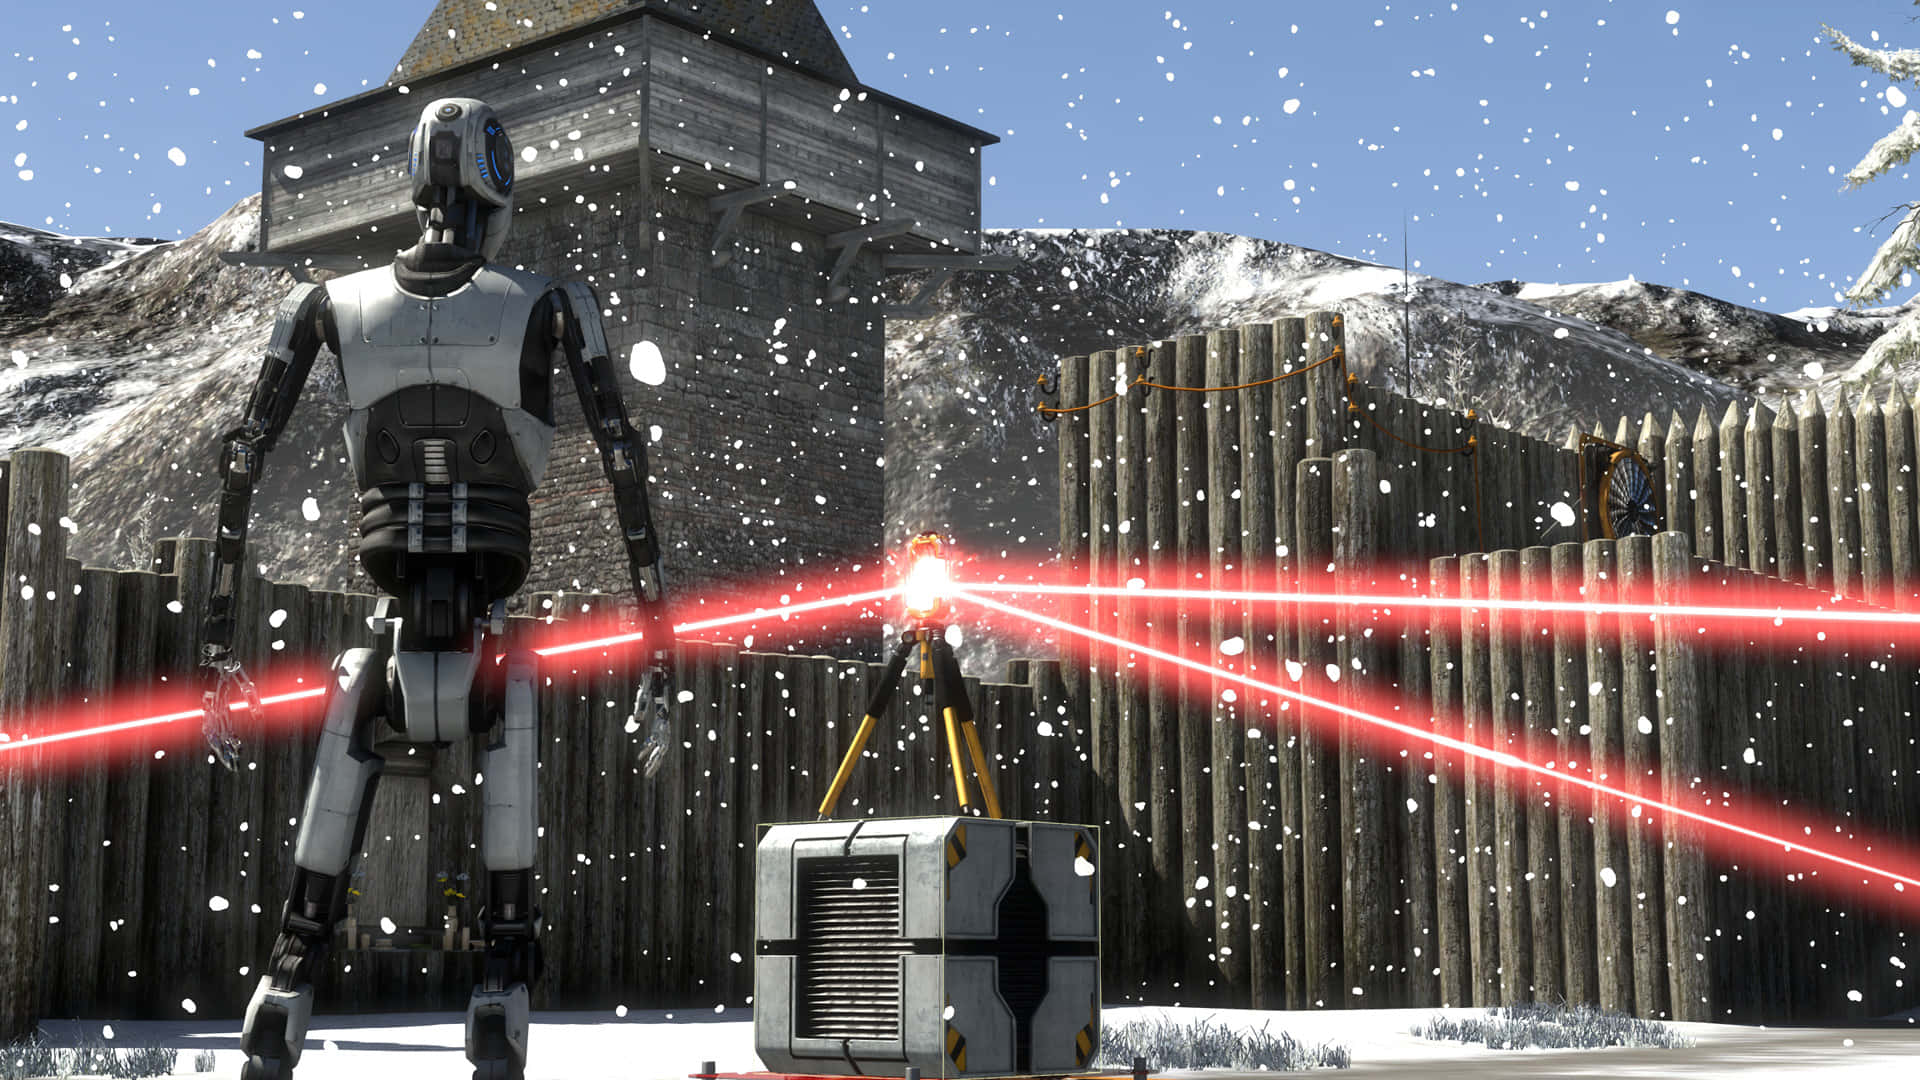 The Talos Principle Background Of The User In The Snow Background